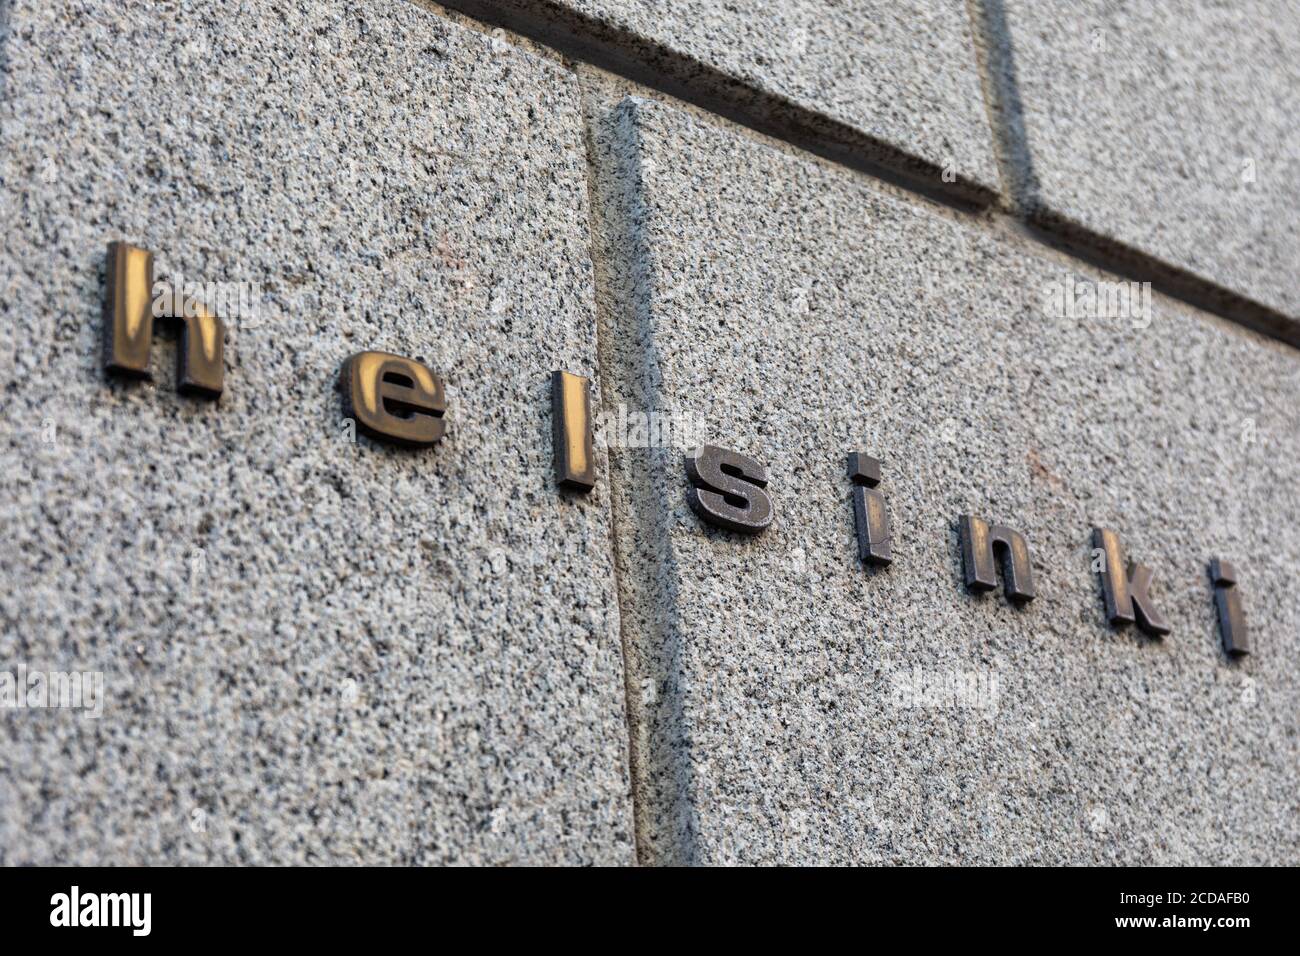 Helsinki metal letters on commercial building wall Stock Photo